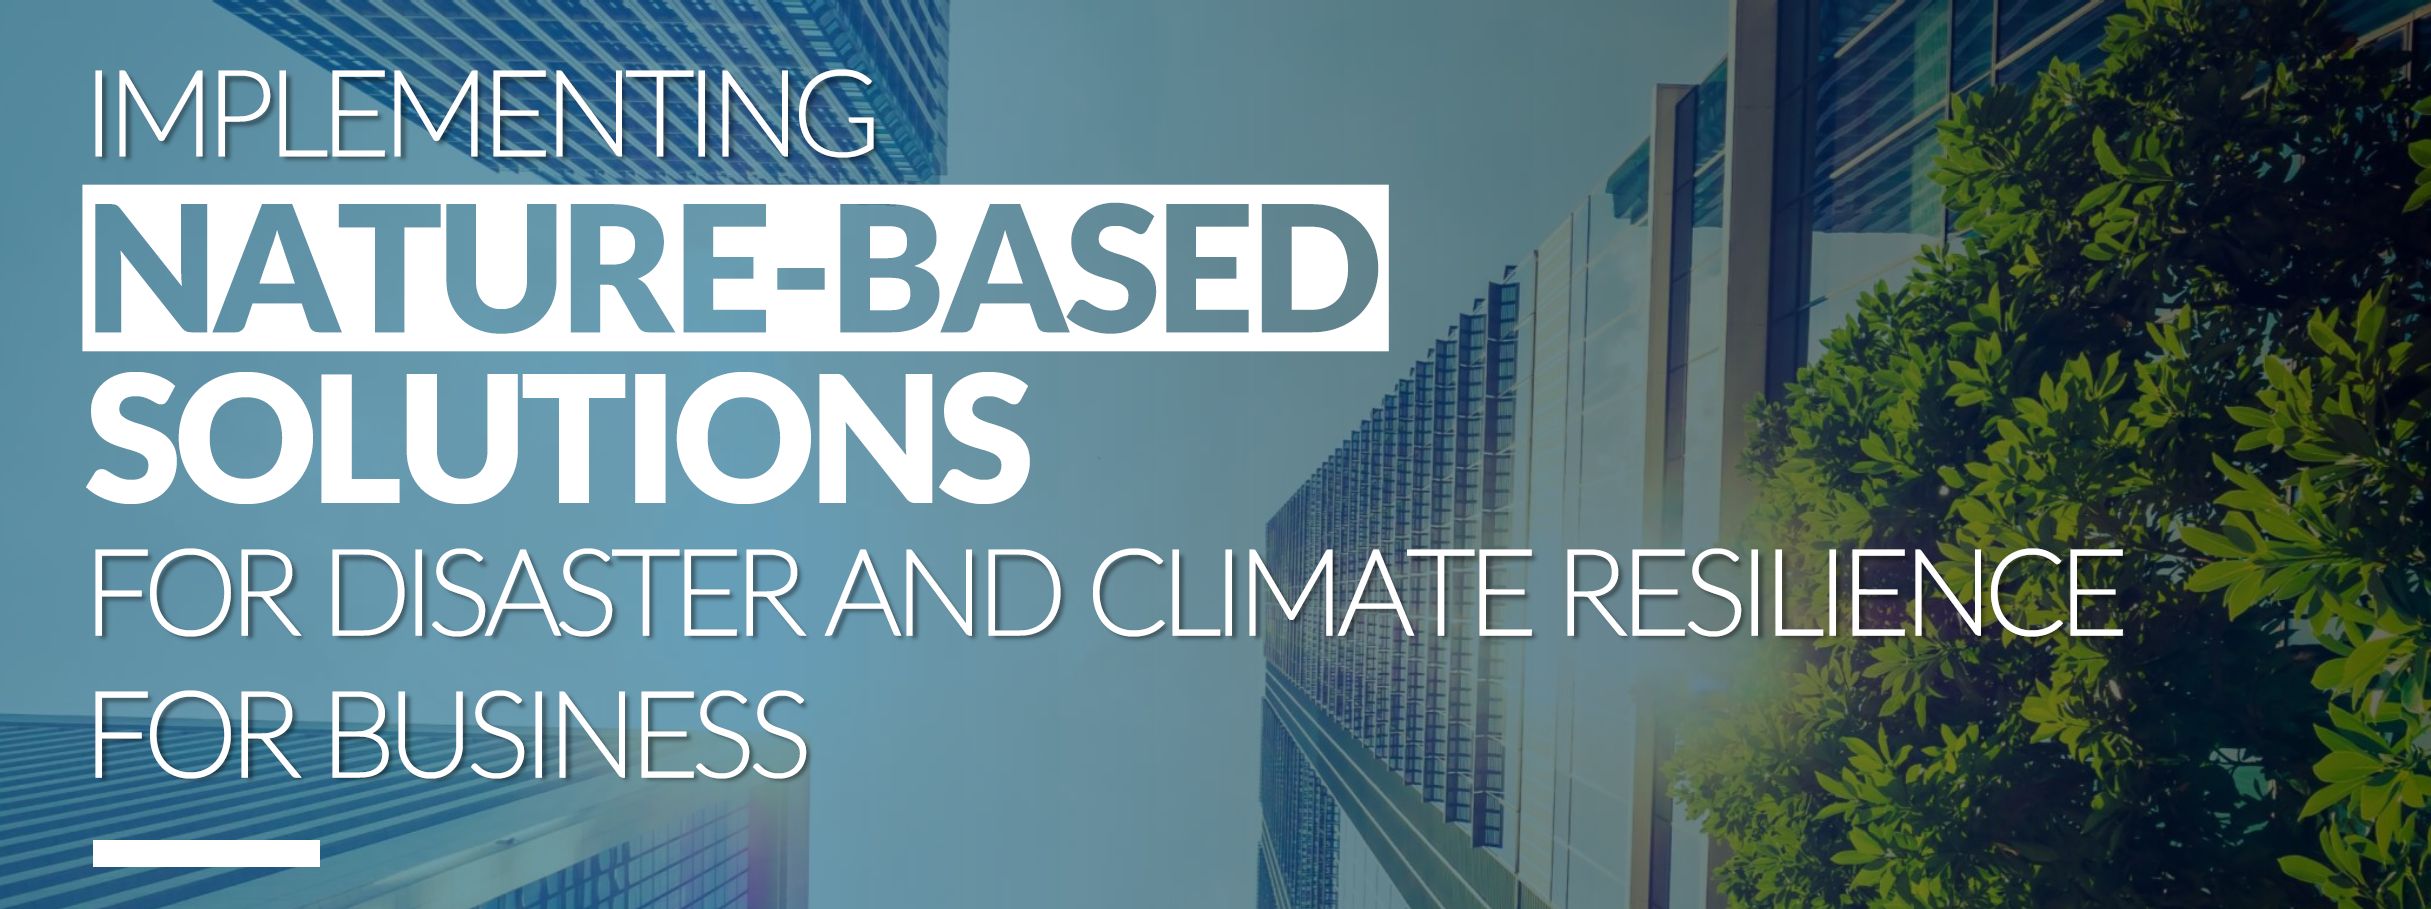 Banner - Nature-based Solutions for Disaster and Climate Resilience for Business